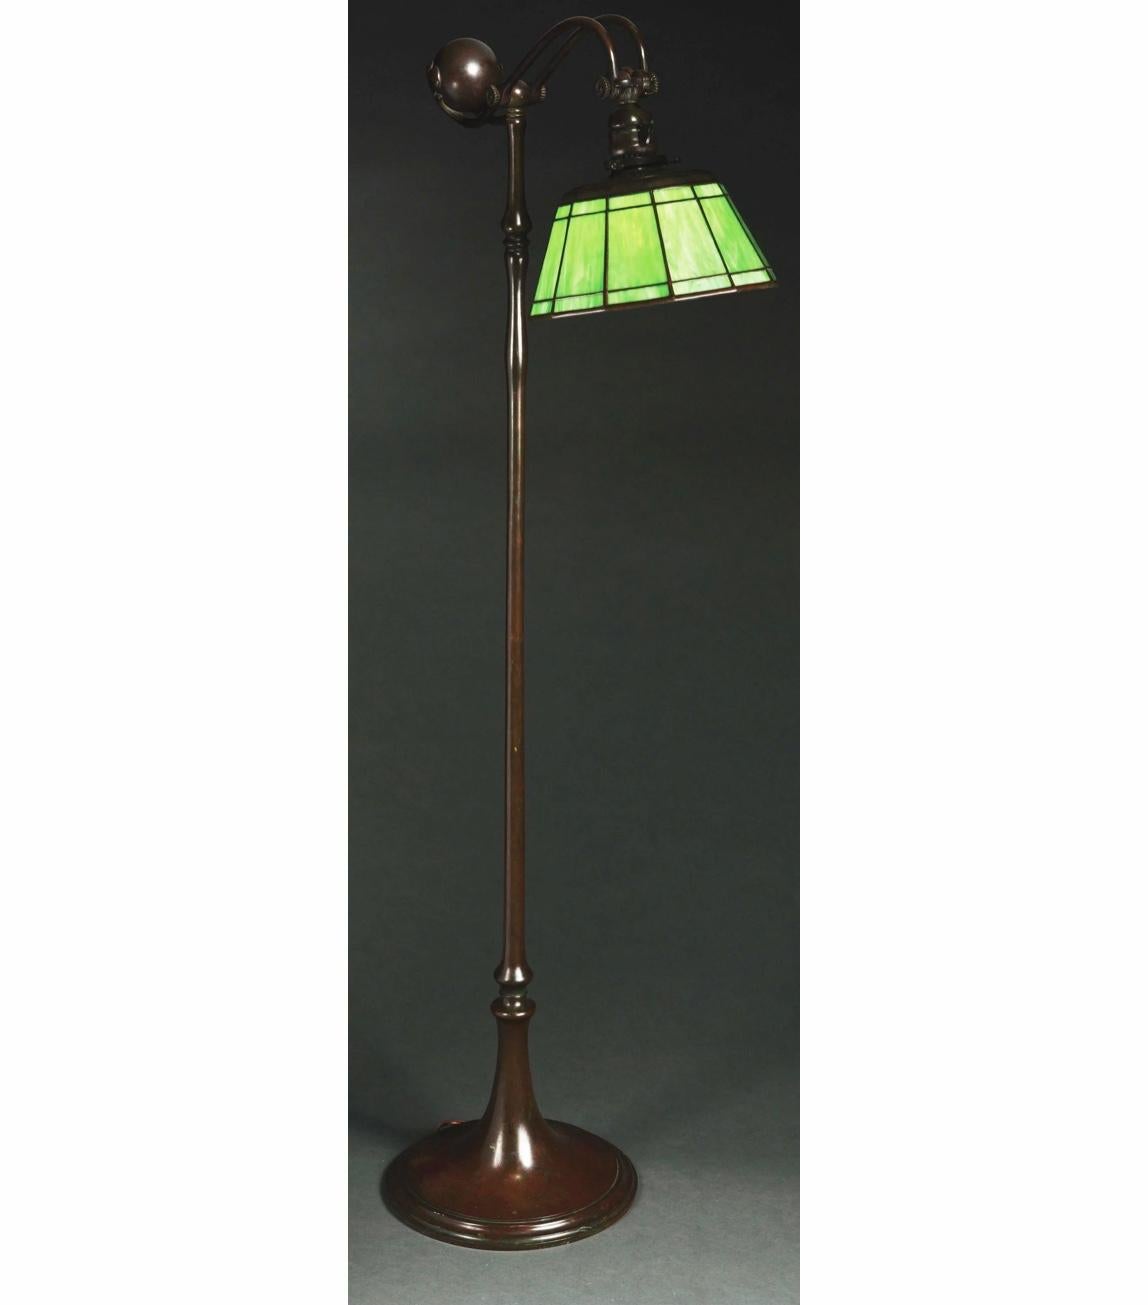 A Tiffany Studios counter balance floor lamp with a leaded green slag glass shade. Shade is 12 sided, each side with a large central panel, and smaller panel above and below. Top of shade in patinated bronze with pattern of “J” shaped